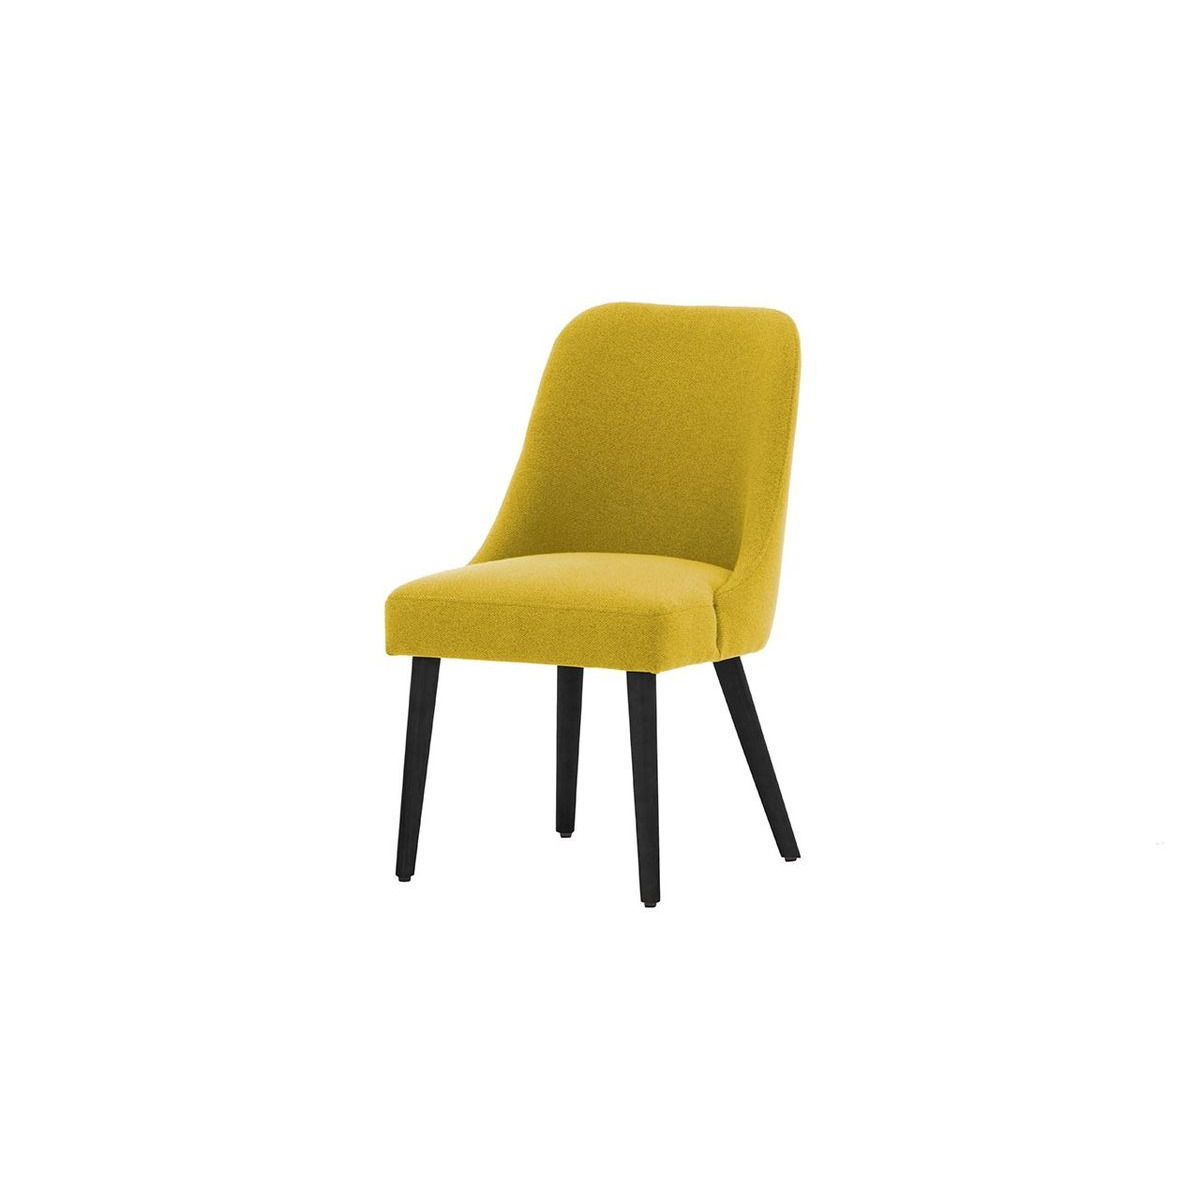 Albion Dining Chair, yellow, Leg colour: black - image 1